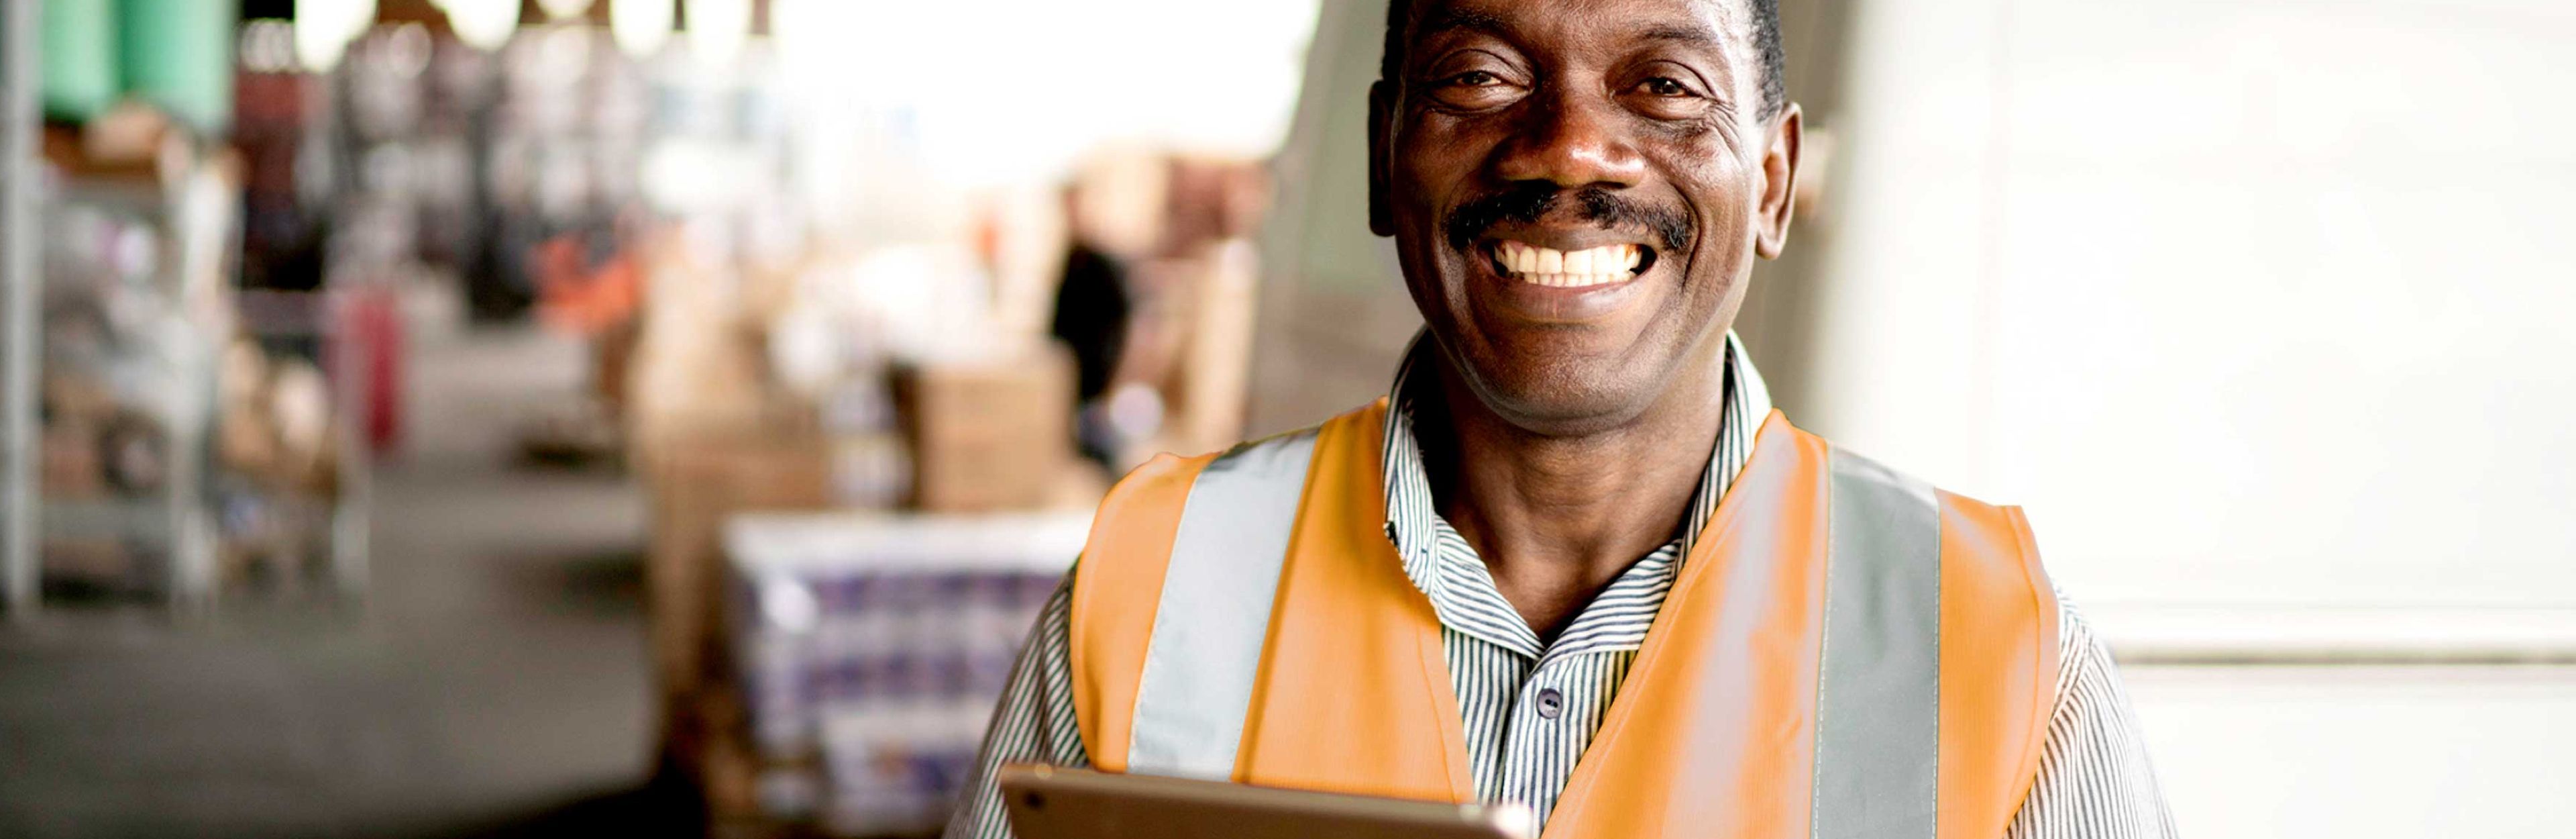 Picture of African man smiling wearing orange safety vest and holding an iPad